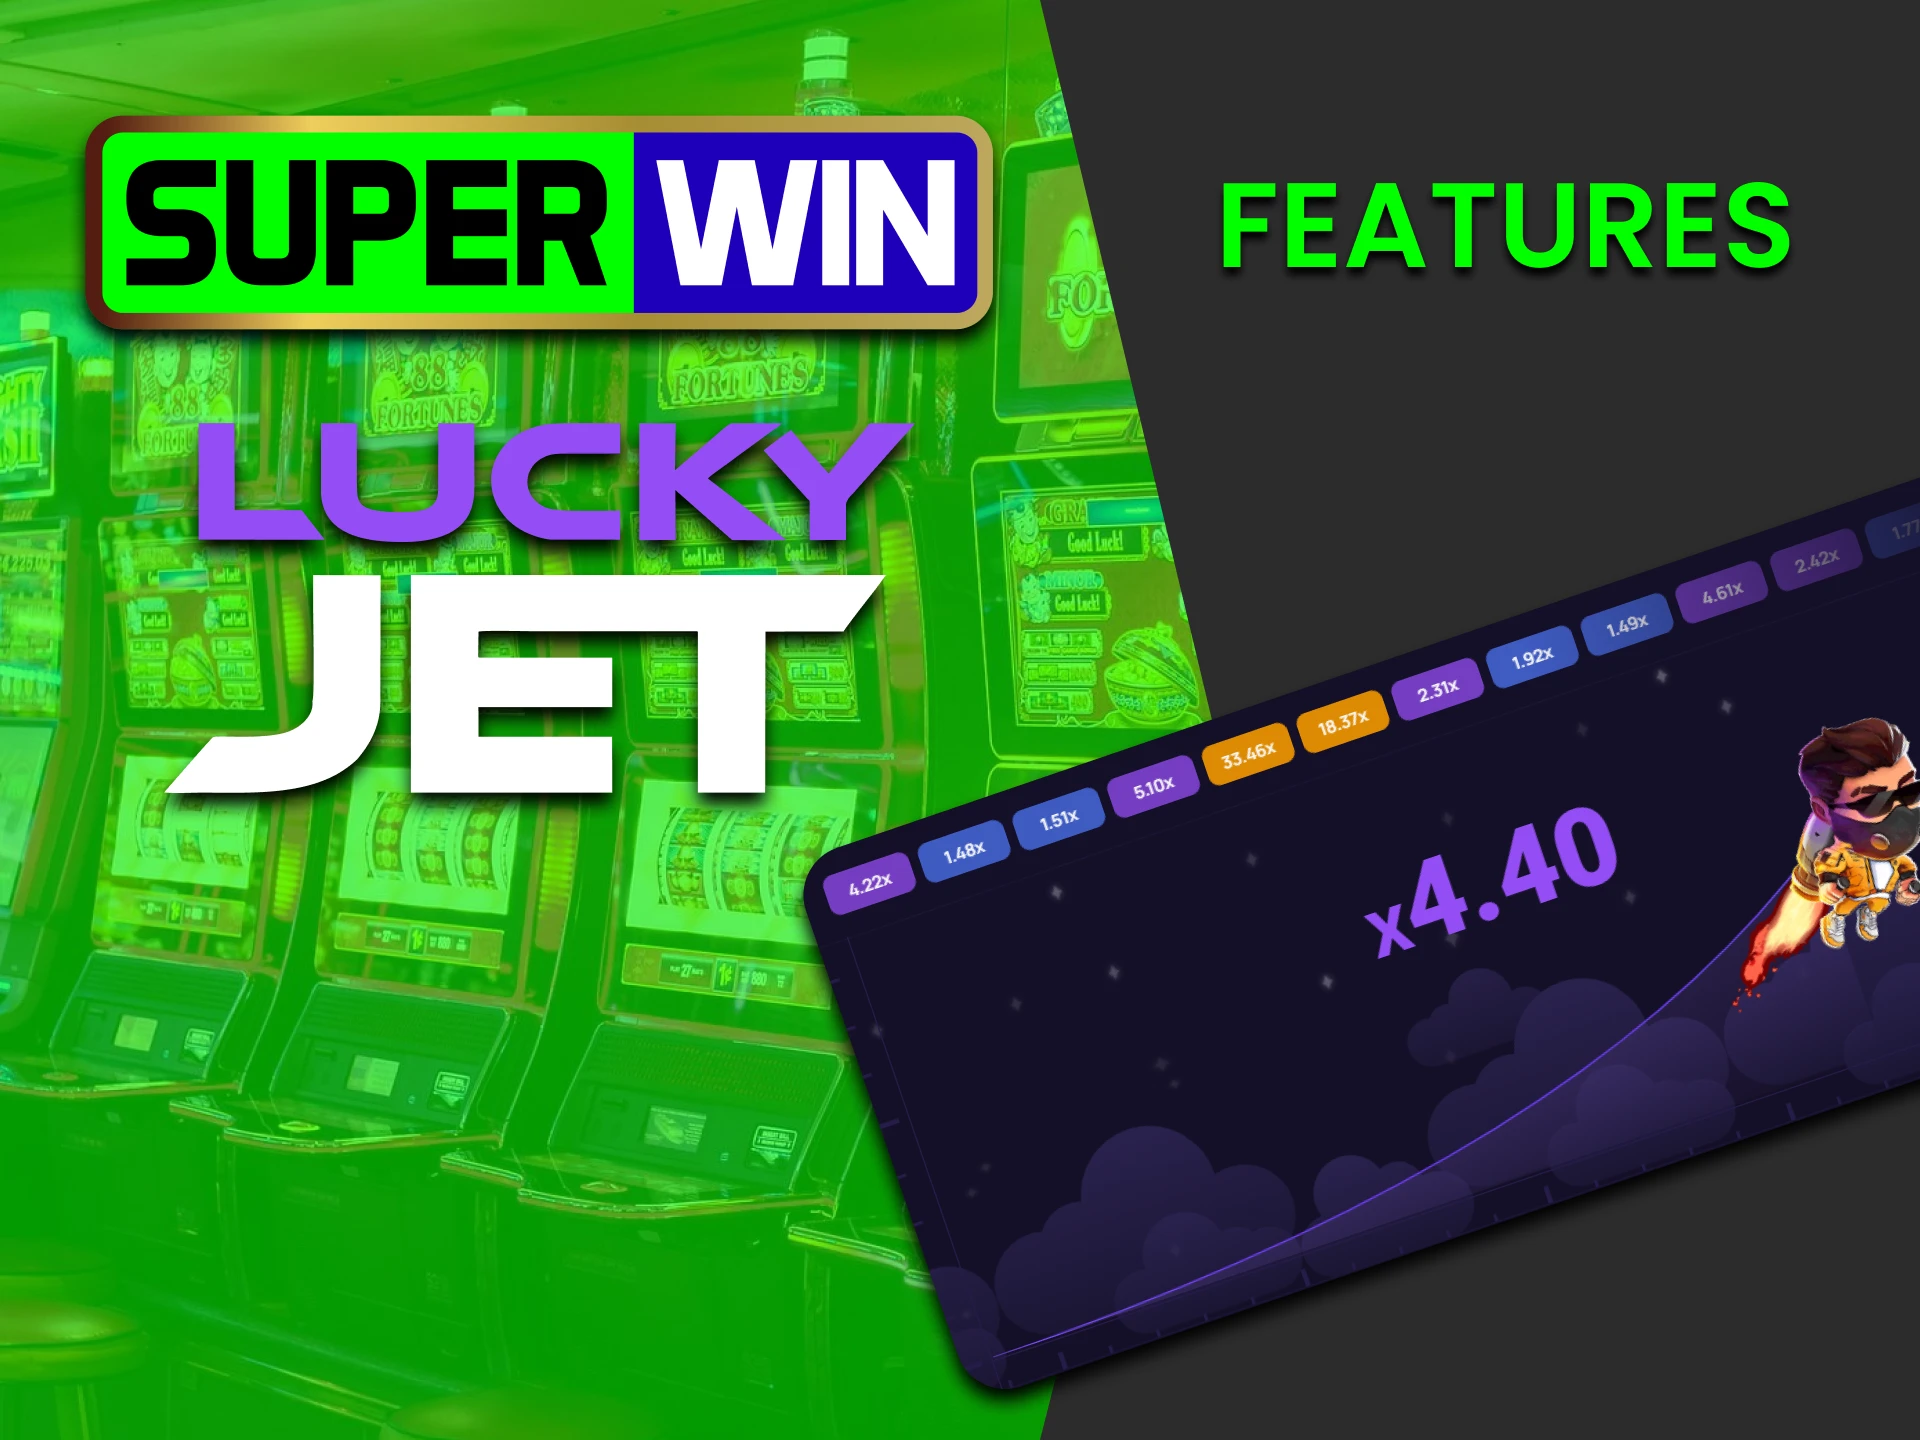 Find out what the future holds for Lucky Jet on Superwin.